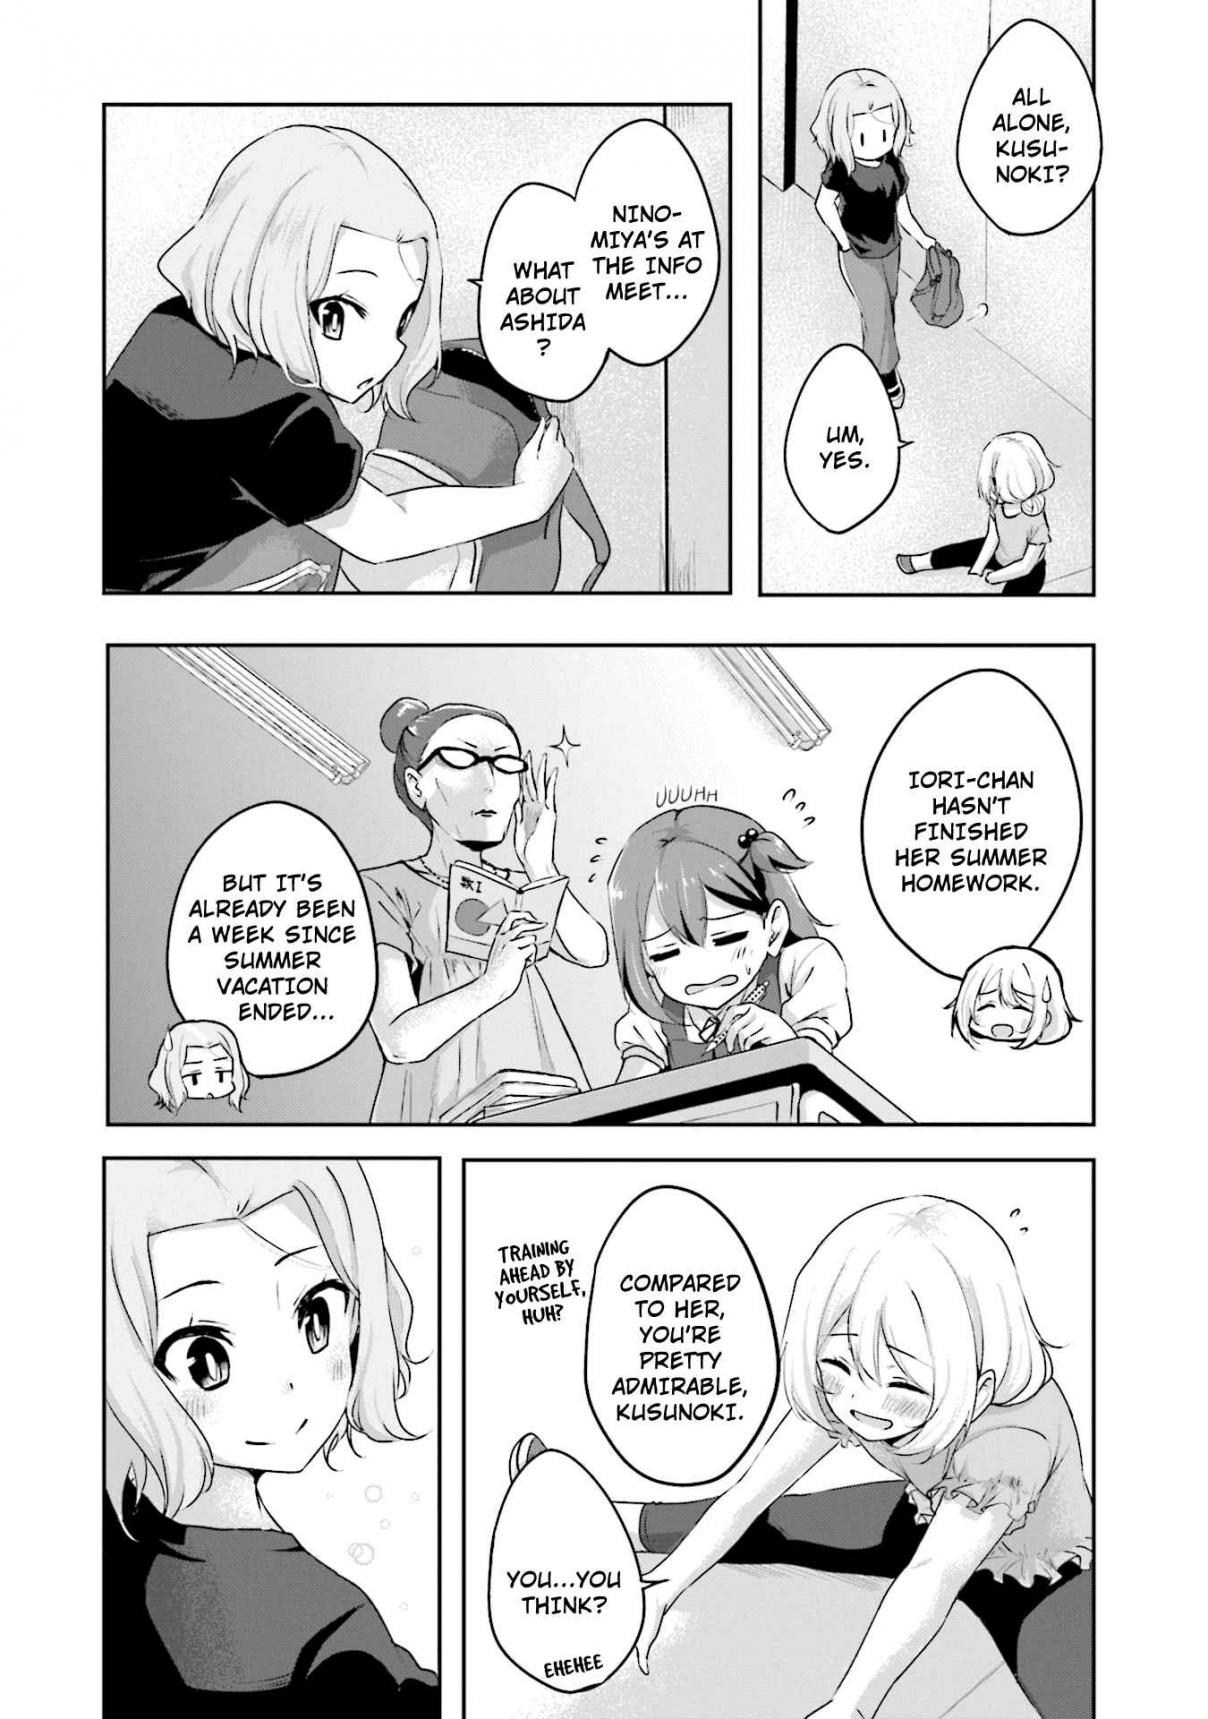 Breakin' Girls! Vol. 2 Ch. 11 The Most Important Thing